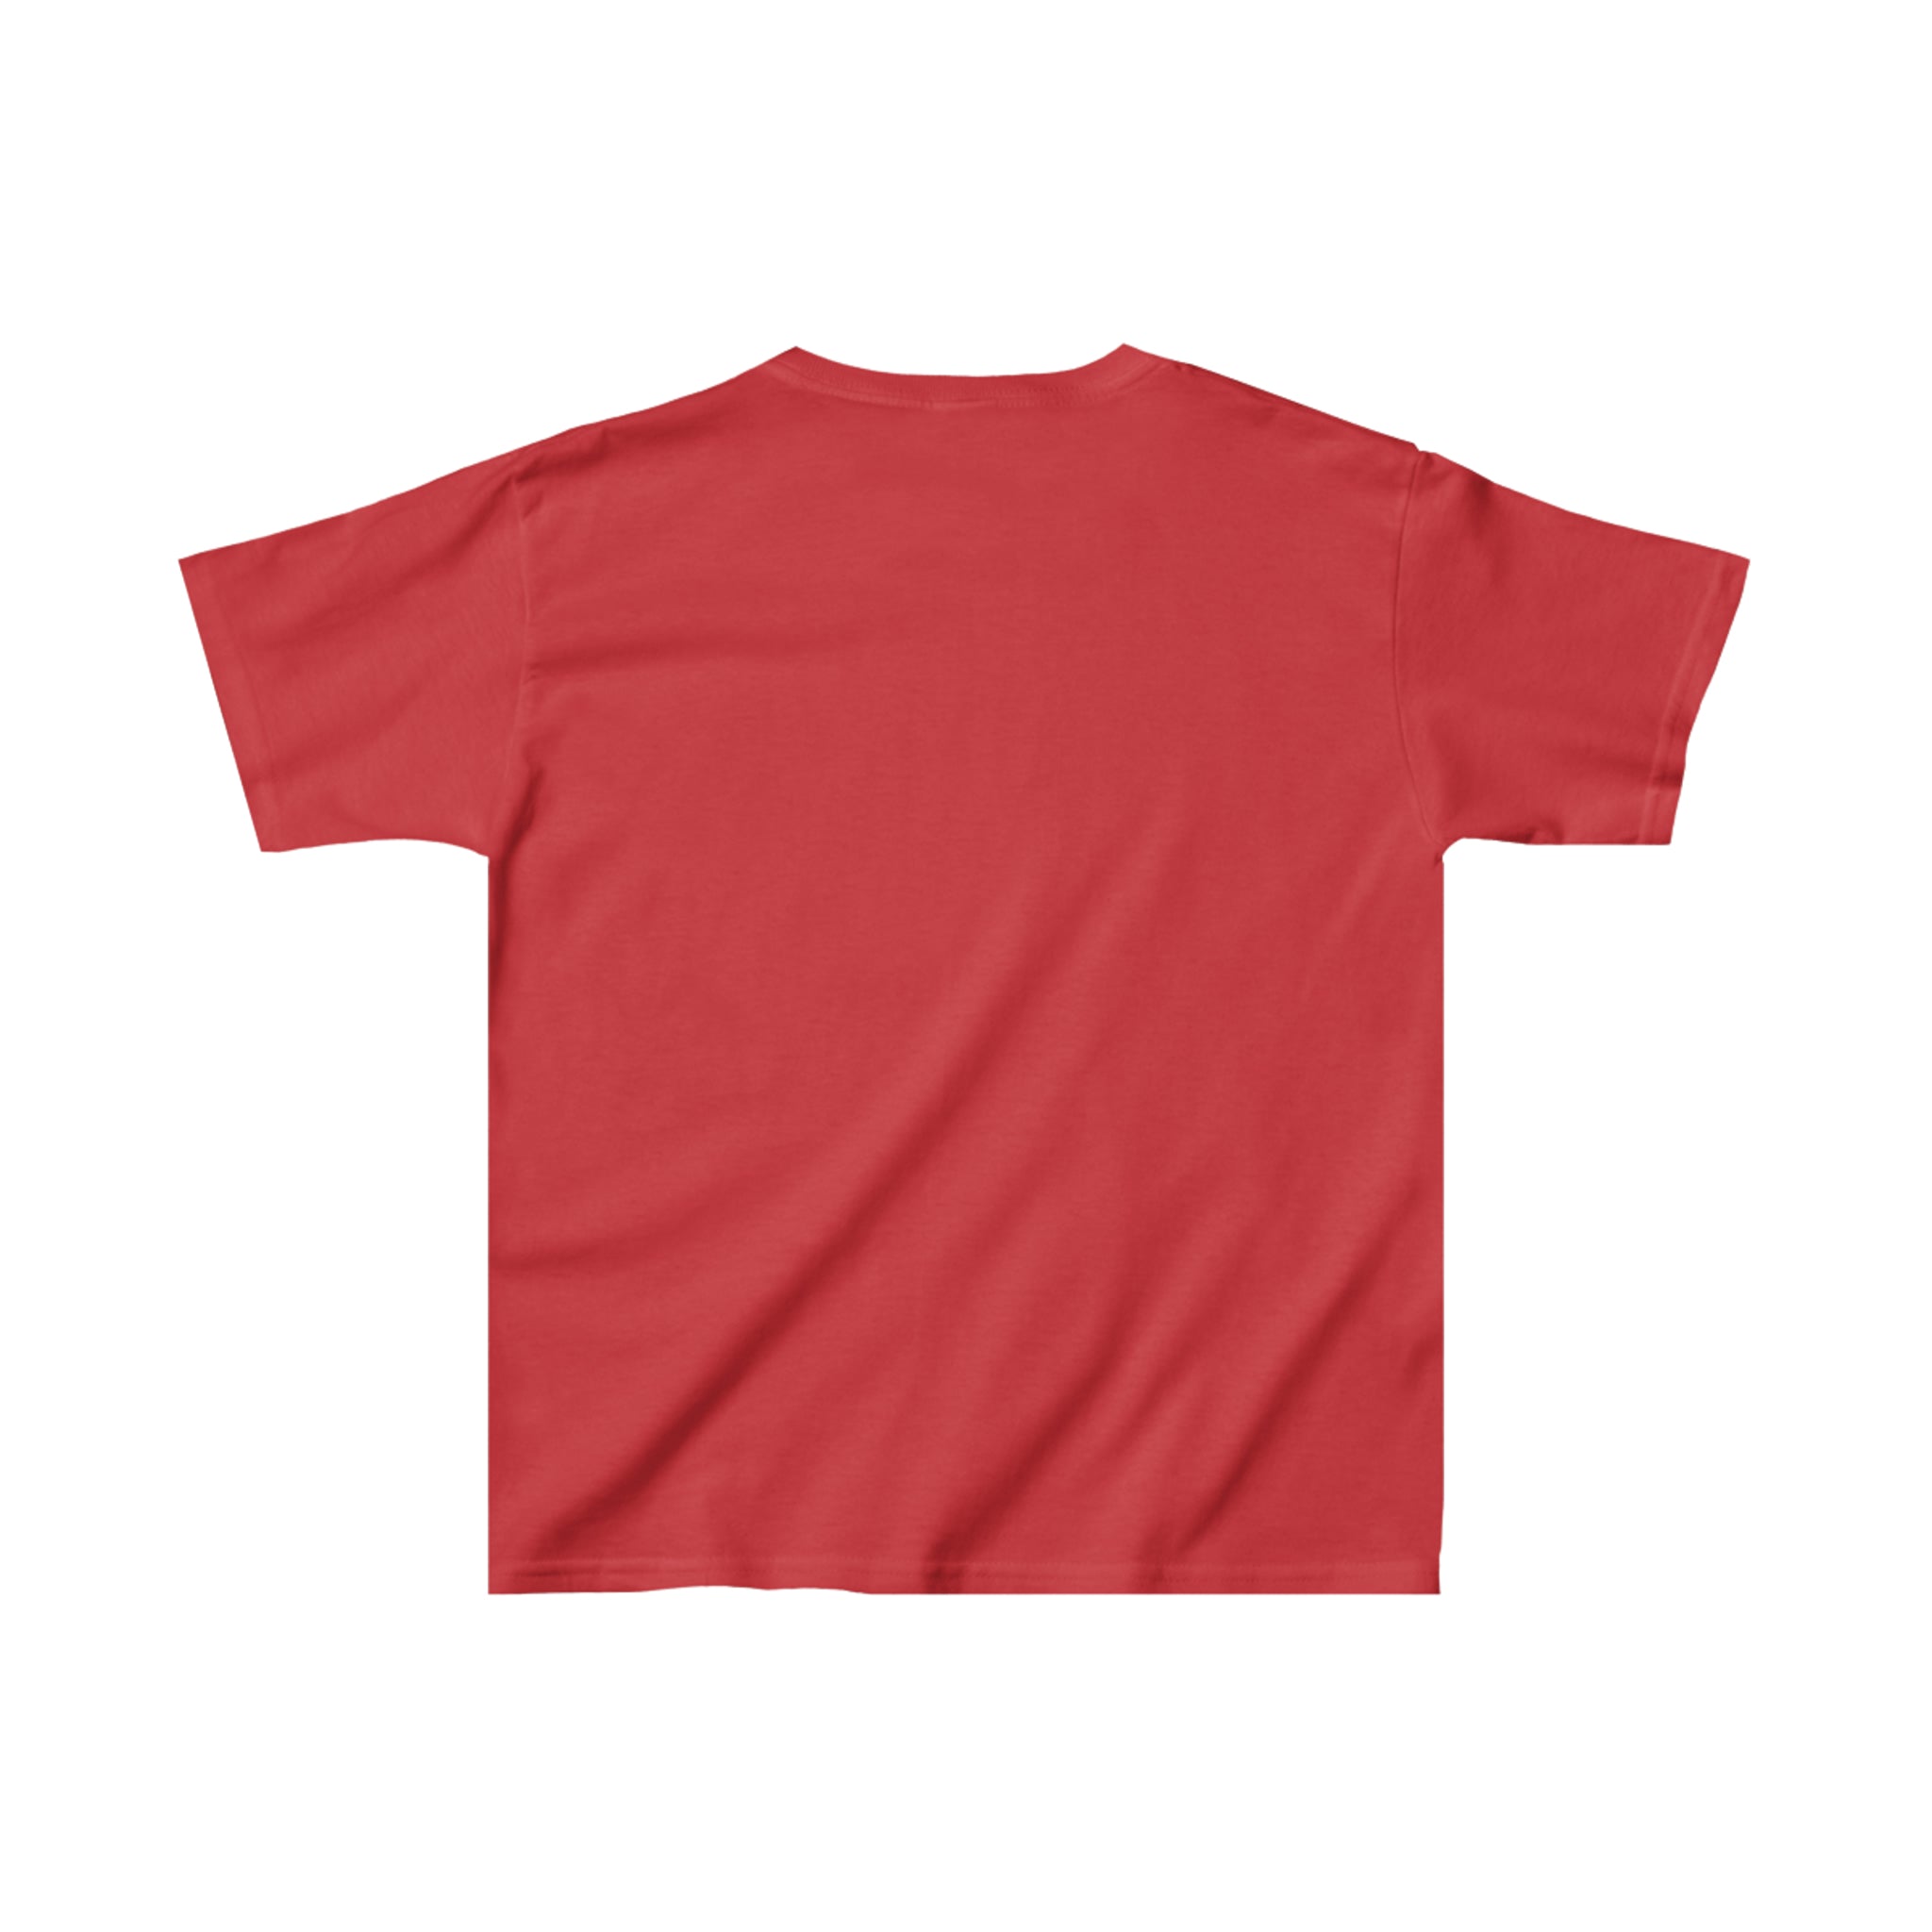 Michigan Stags T-Shirt (Youth)